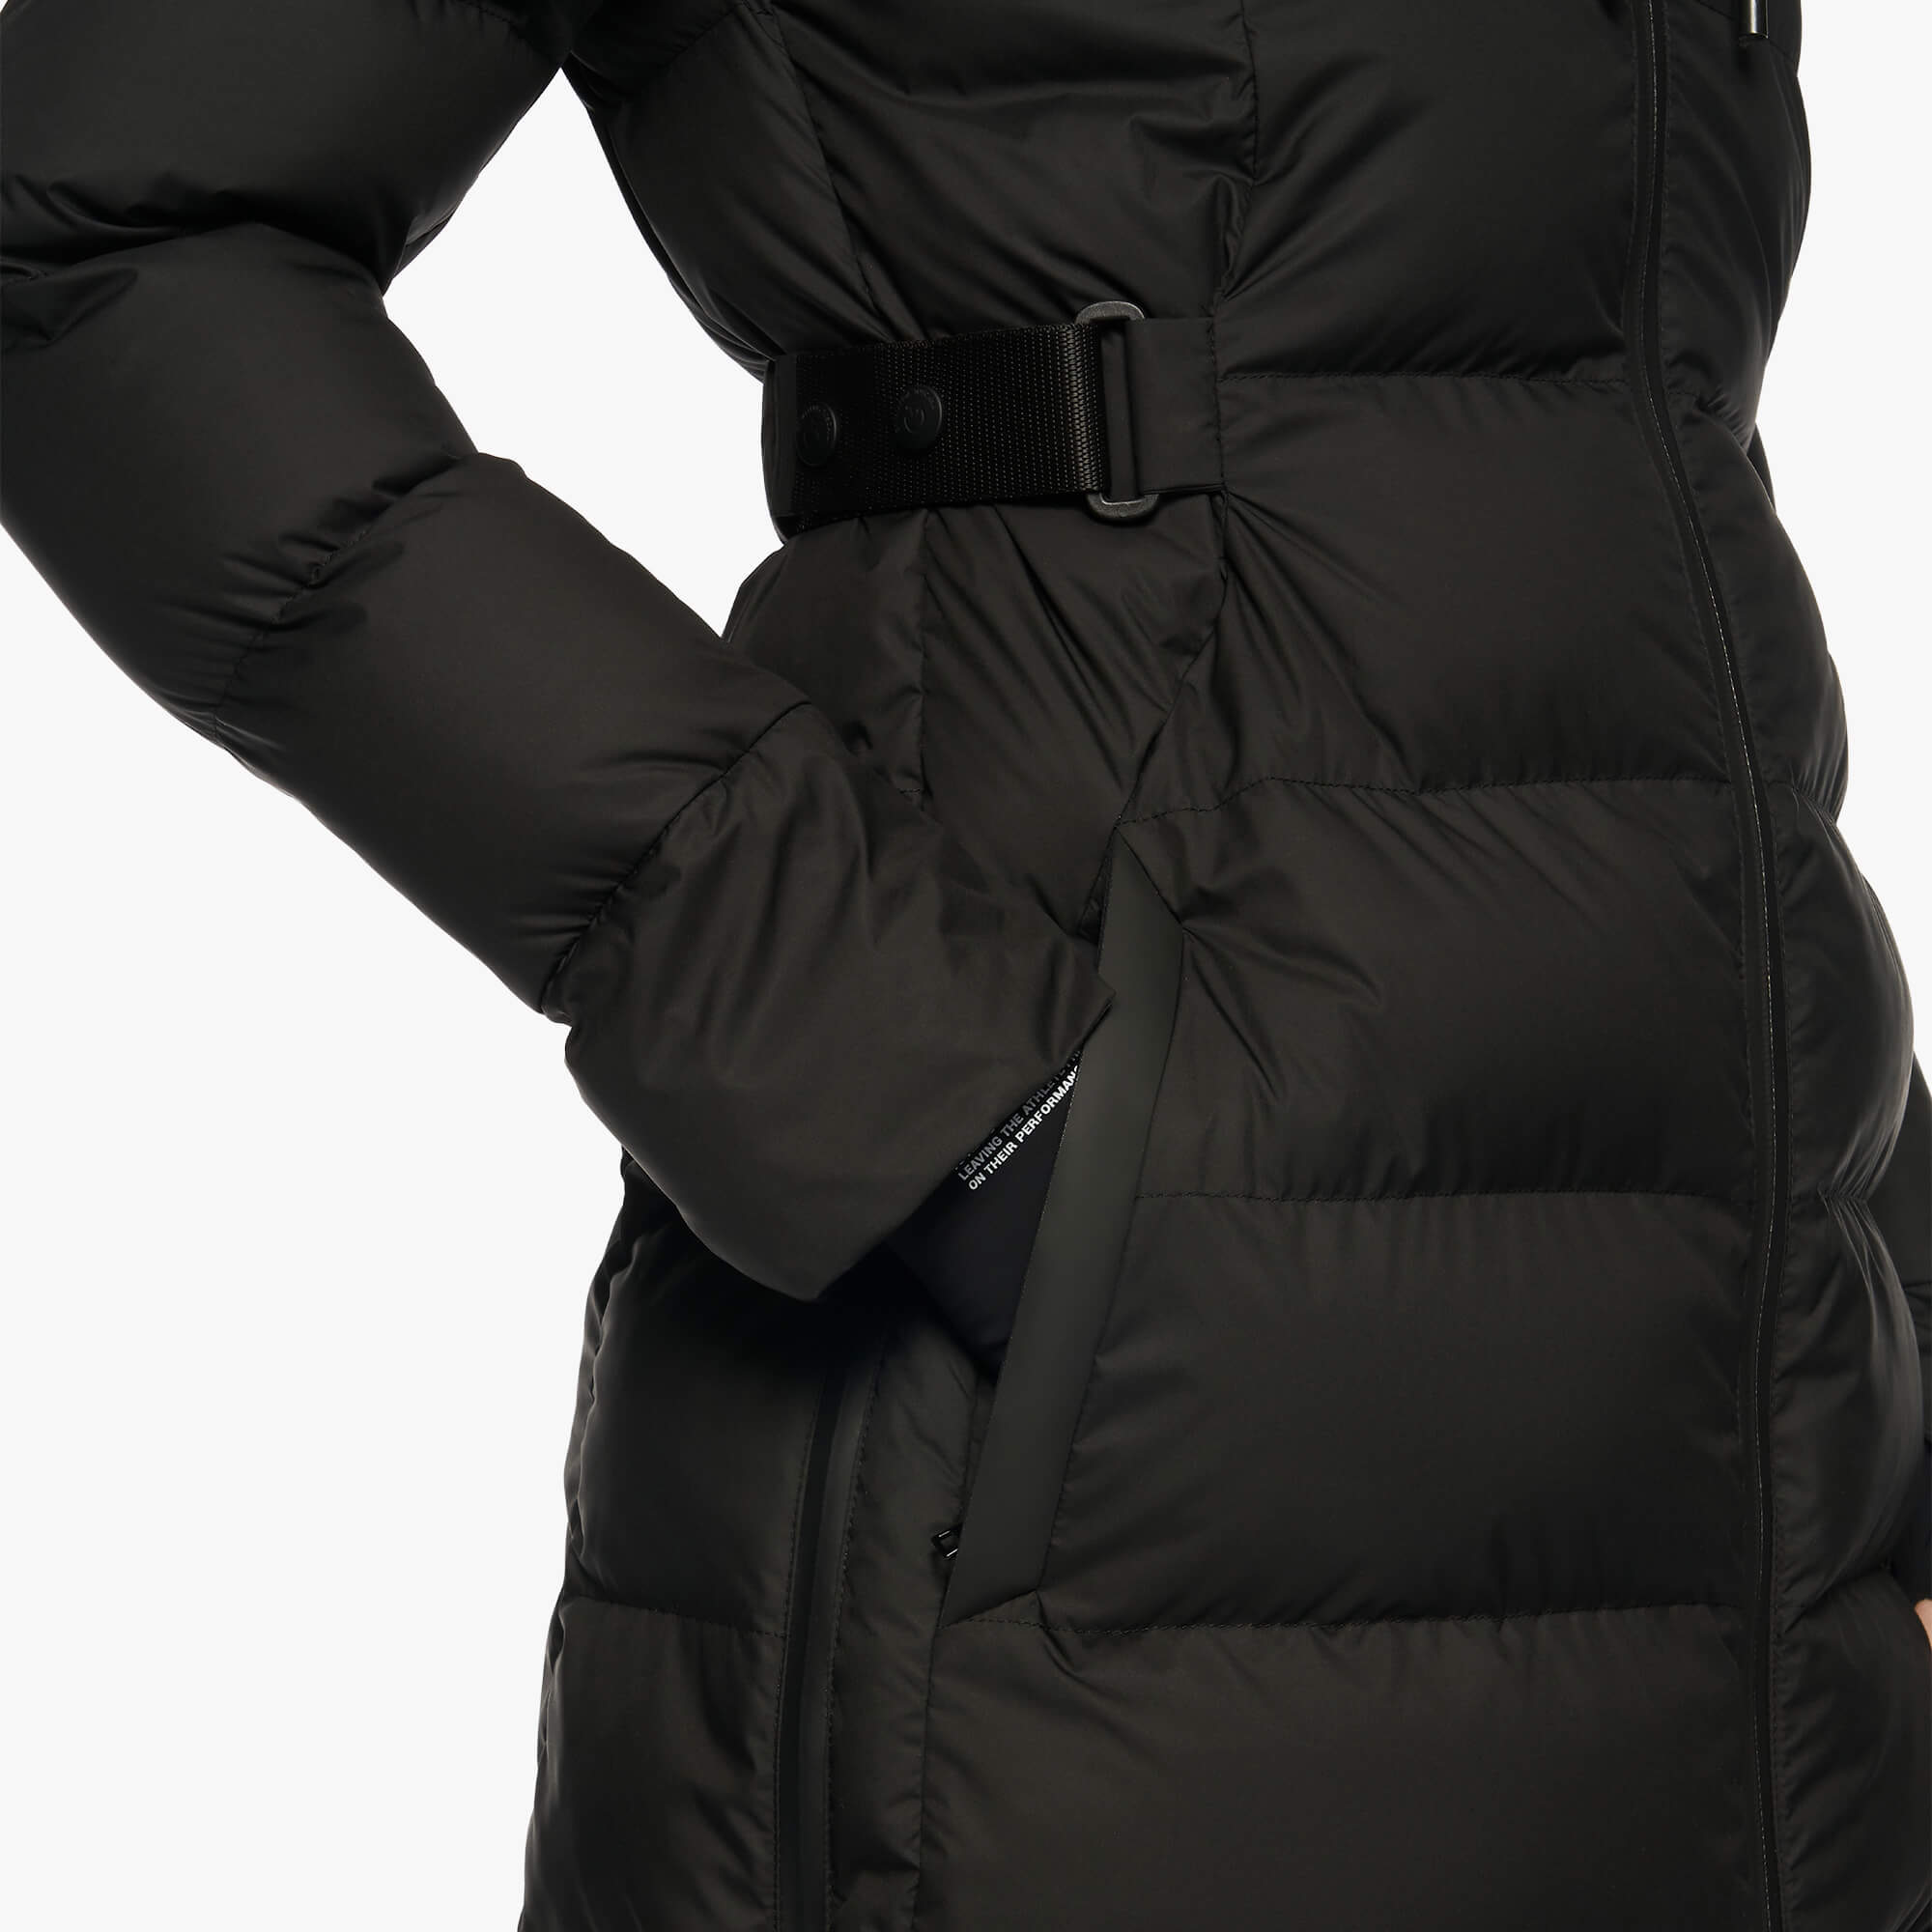 Women's down jacket with extra warm technology